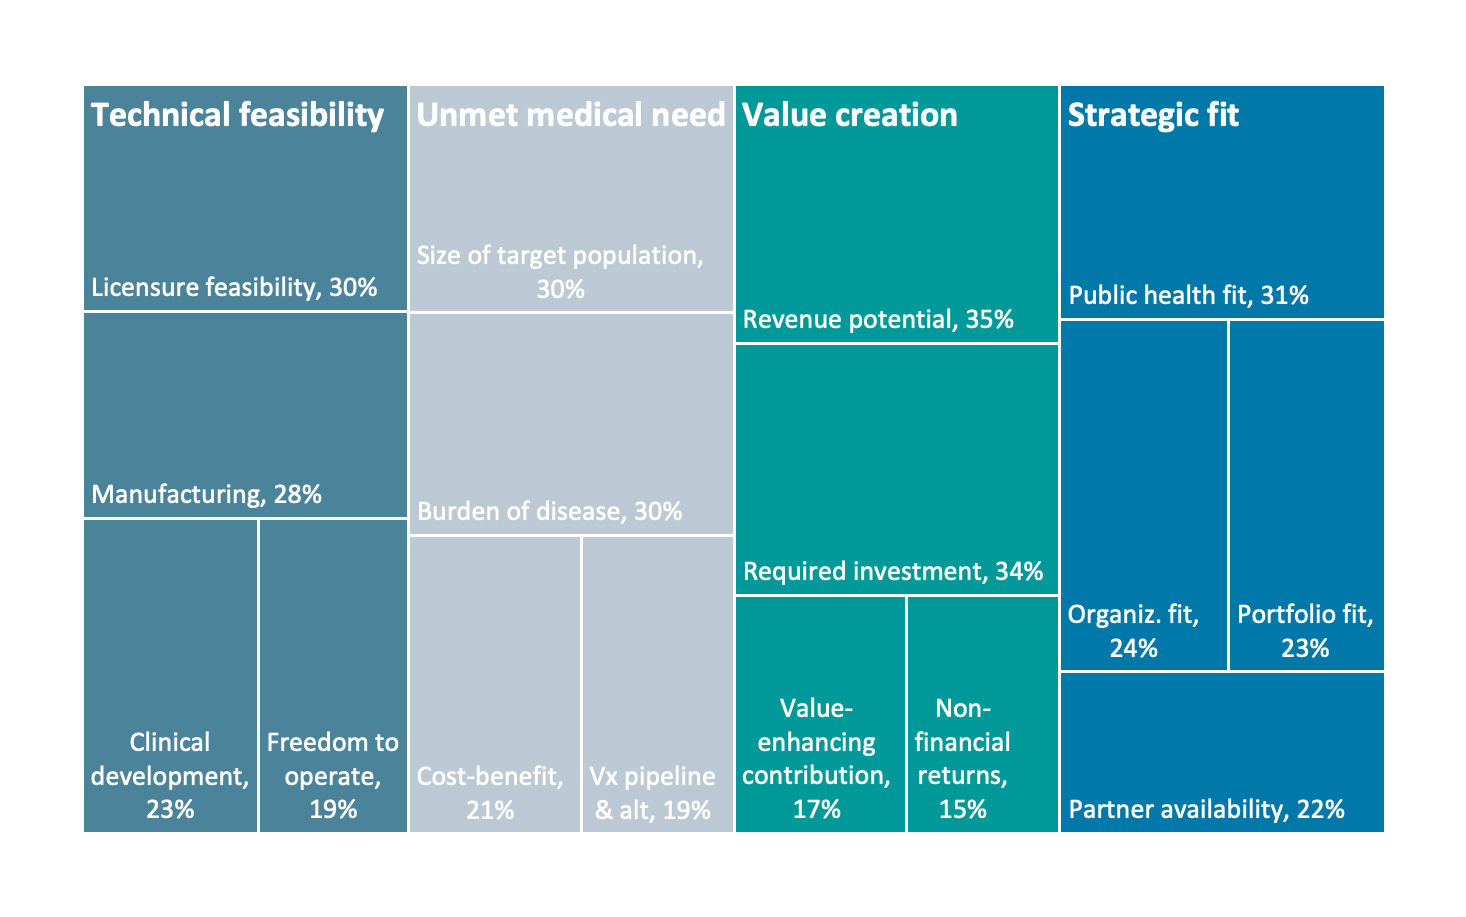 Figure 4. Relative importance of sub-factors within broad categories of influence 
Source: MMGH Consulting for the Wellcome Trust, 2020
